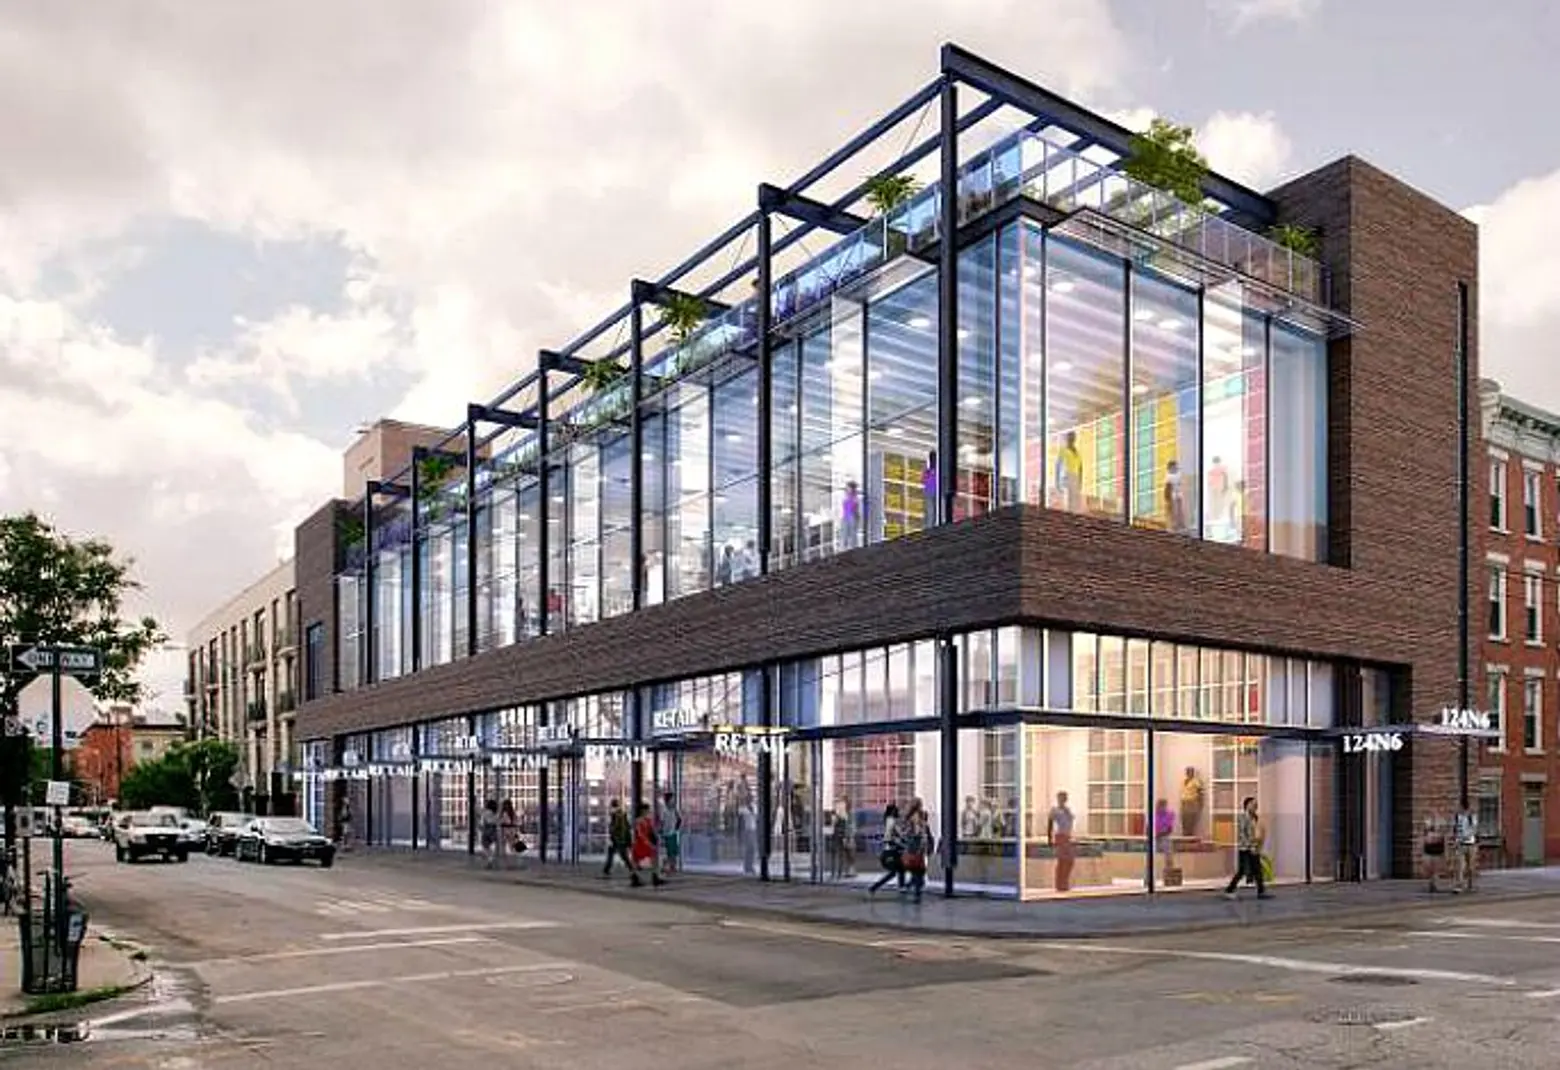 REVEALED: First Look at Thor Equities’ Retail Jewel Box in Williamsburg